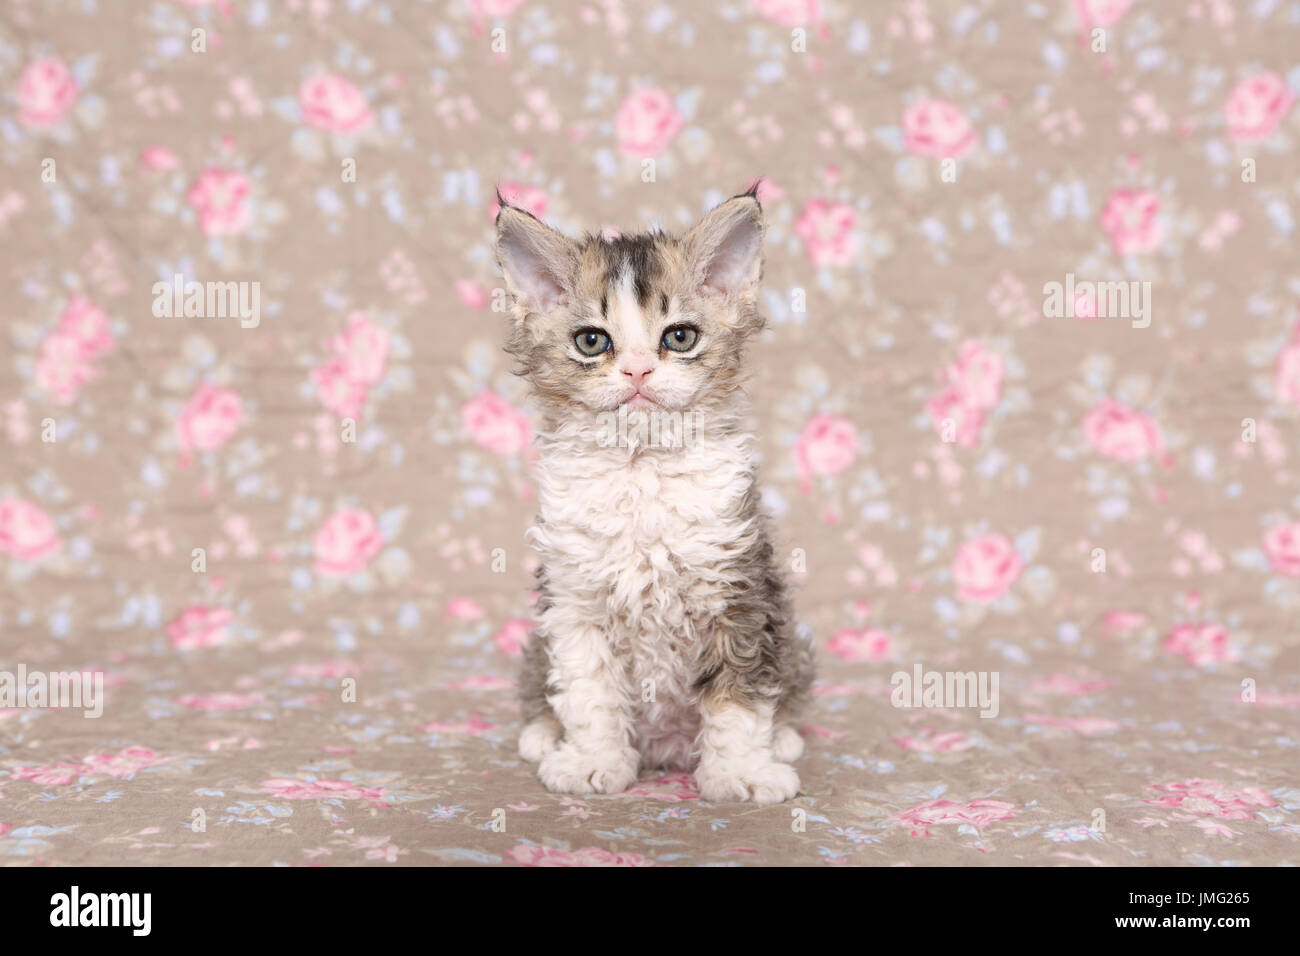 Selkirk Rex. Kitten (6 weeks old) sitting. Studio picture seen against a floral design wallpaper. Germany Stock Photo